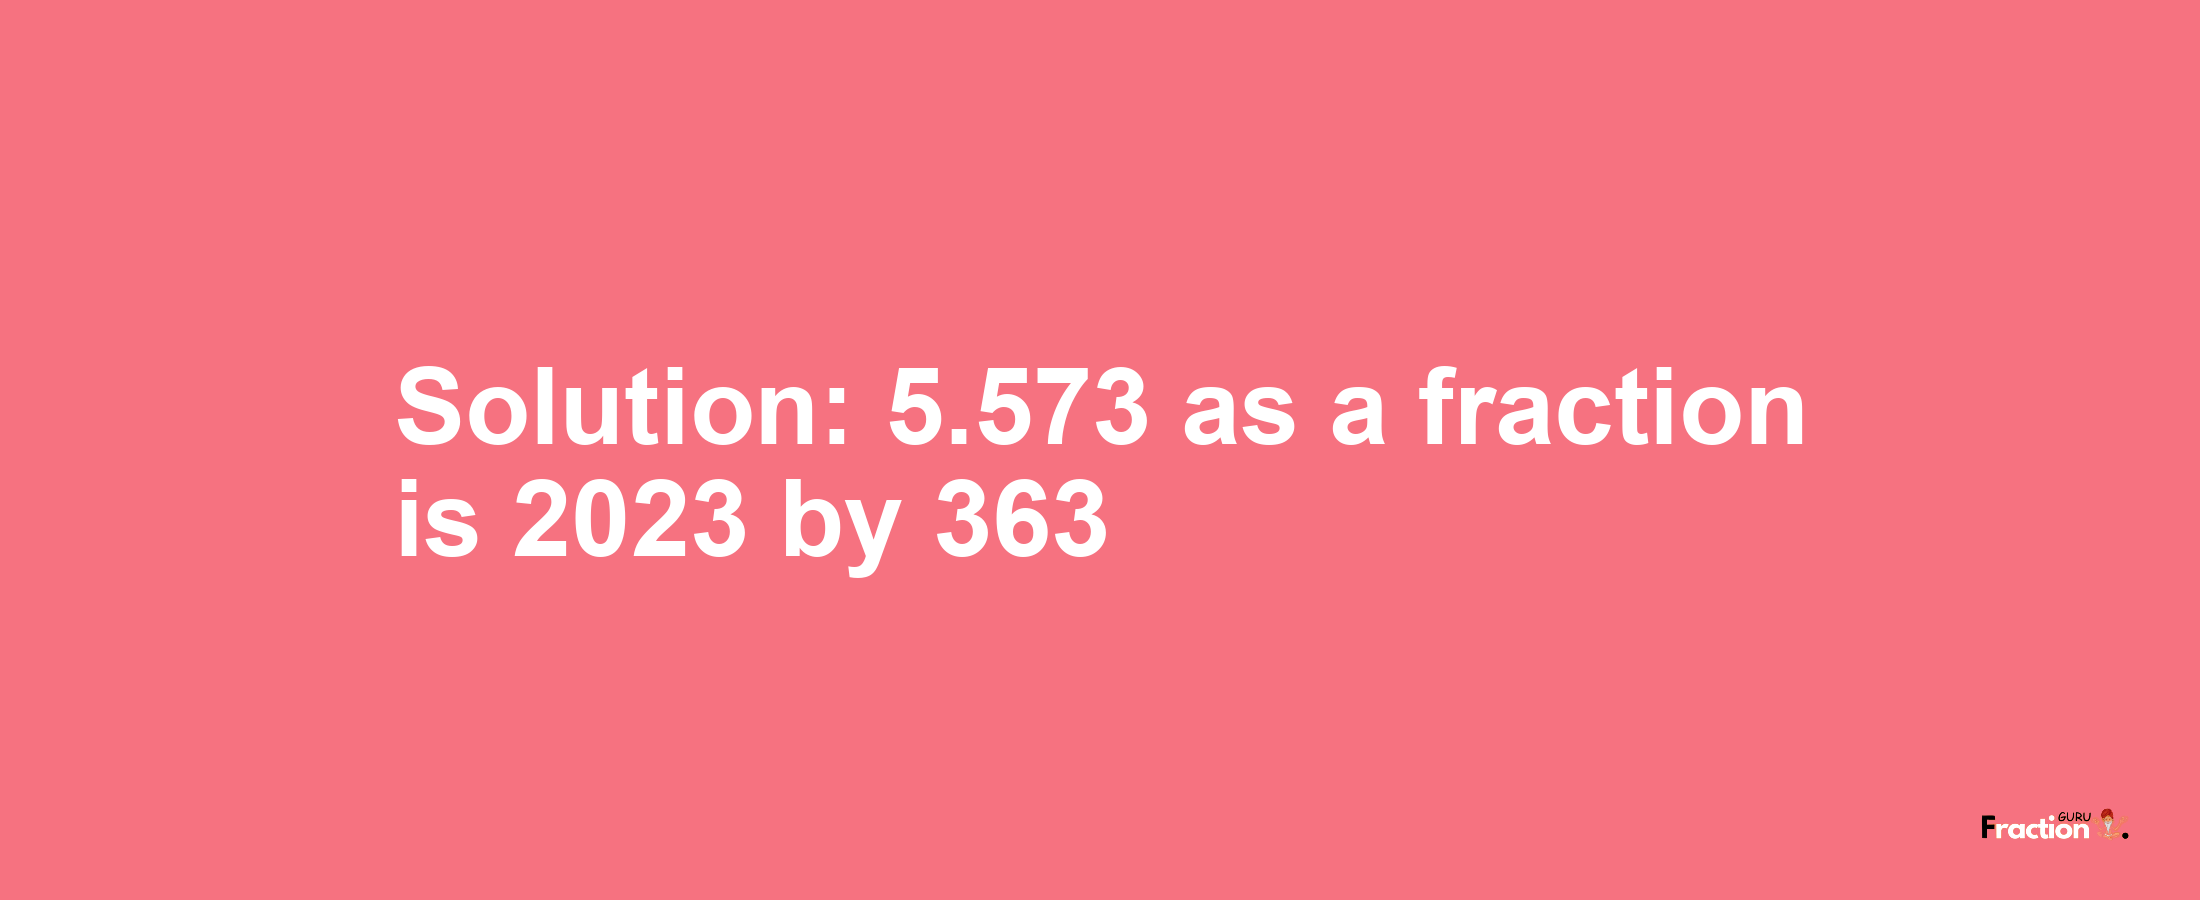 Solution:5.573 as a fraction is 2023/363